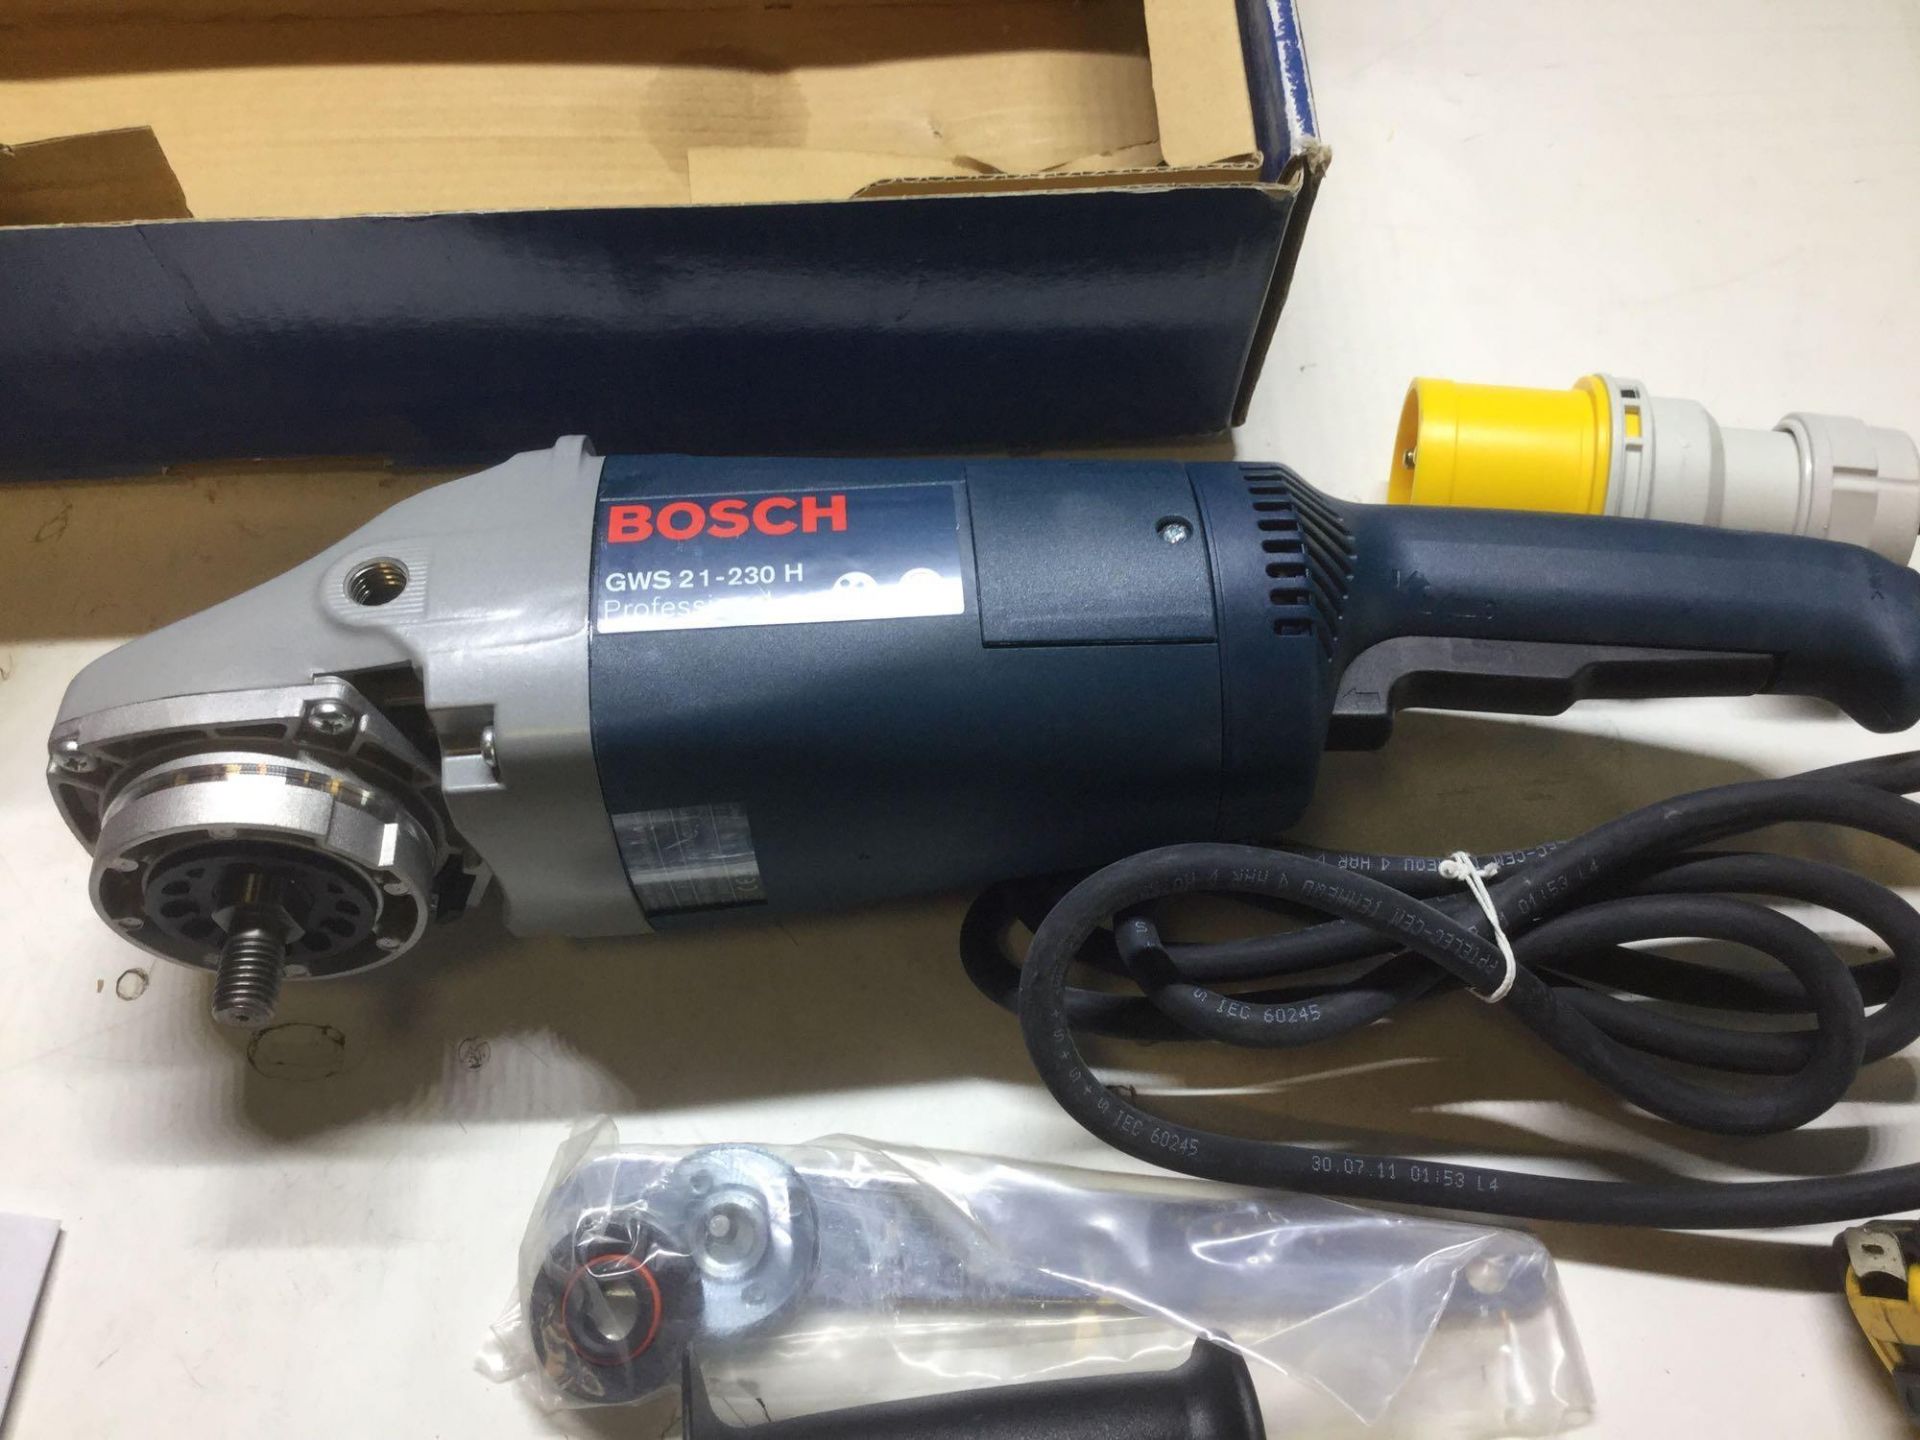 Bosch GWS 21 230 H 9 inch Angle Grinder 110v (New In Box) - Image 3 of 6